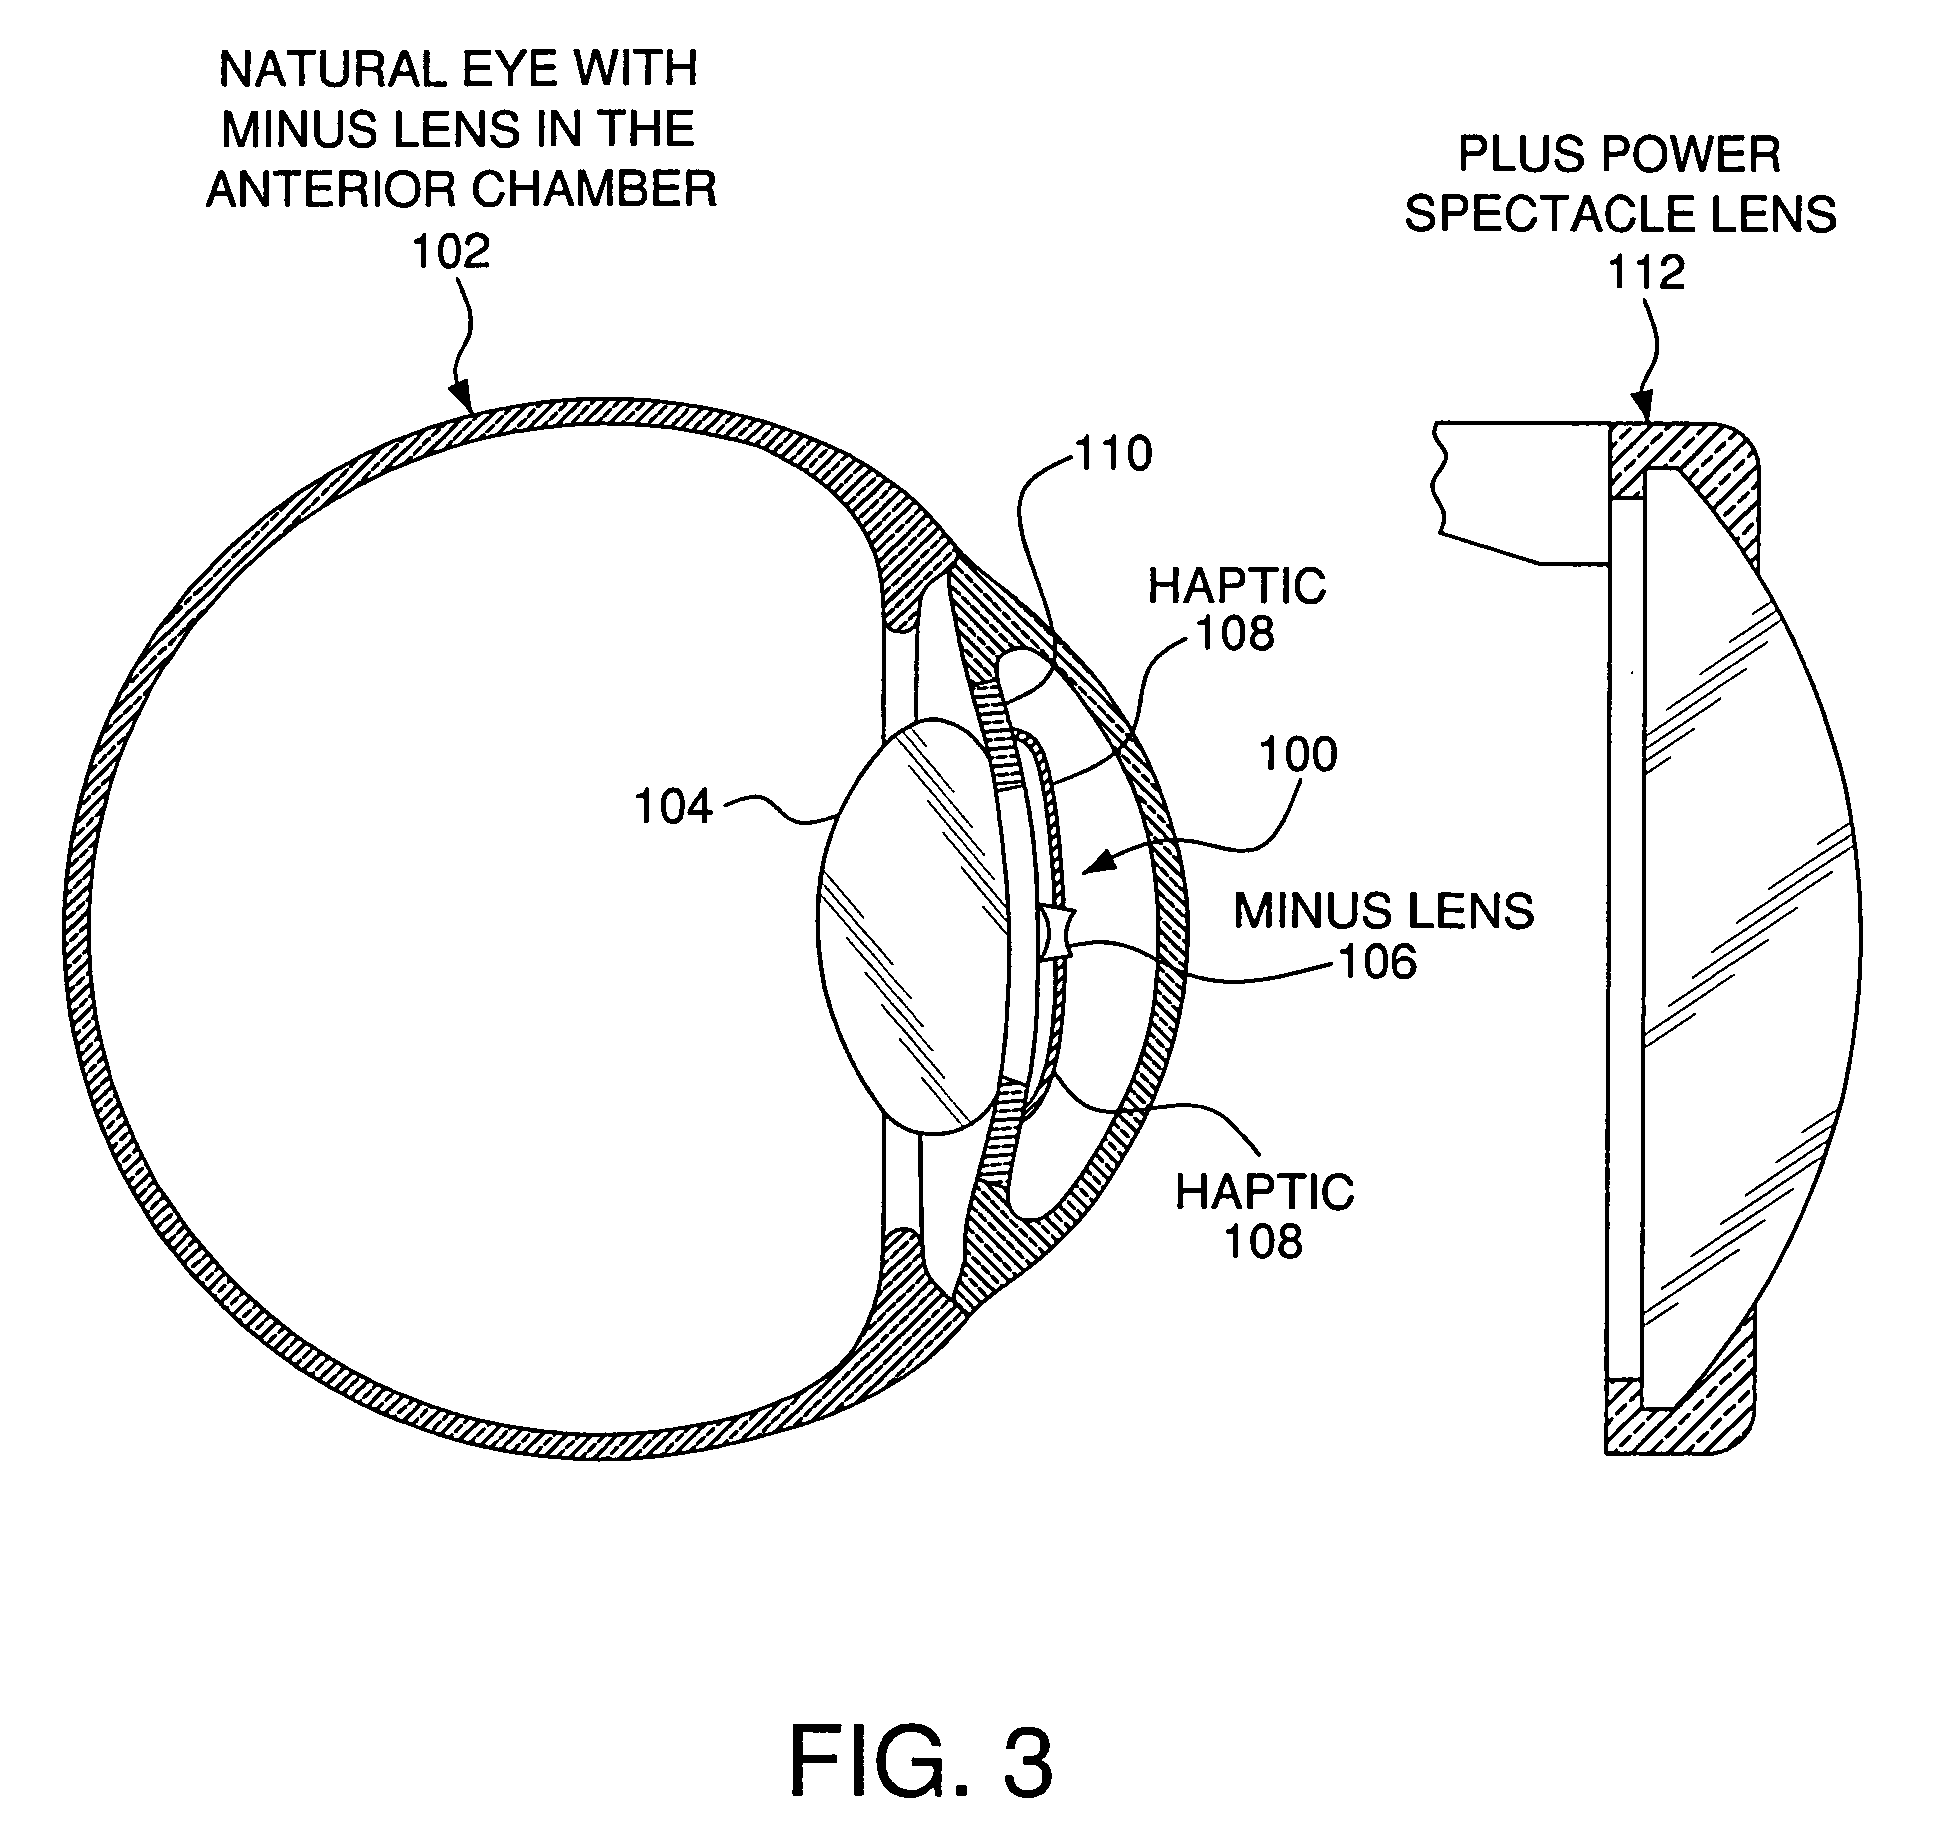 Teledioptic lens system and method for using the same